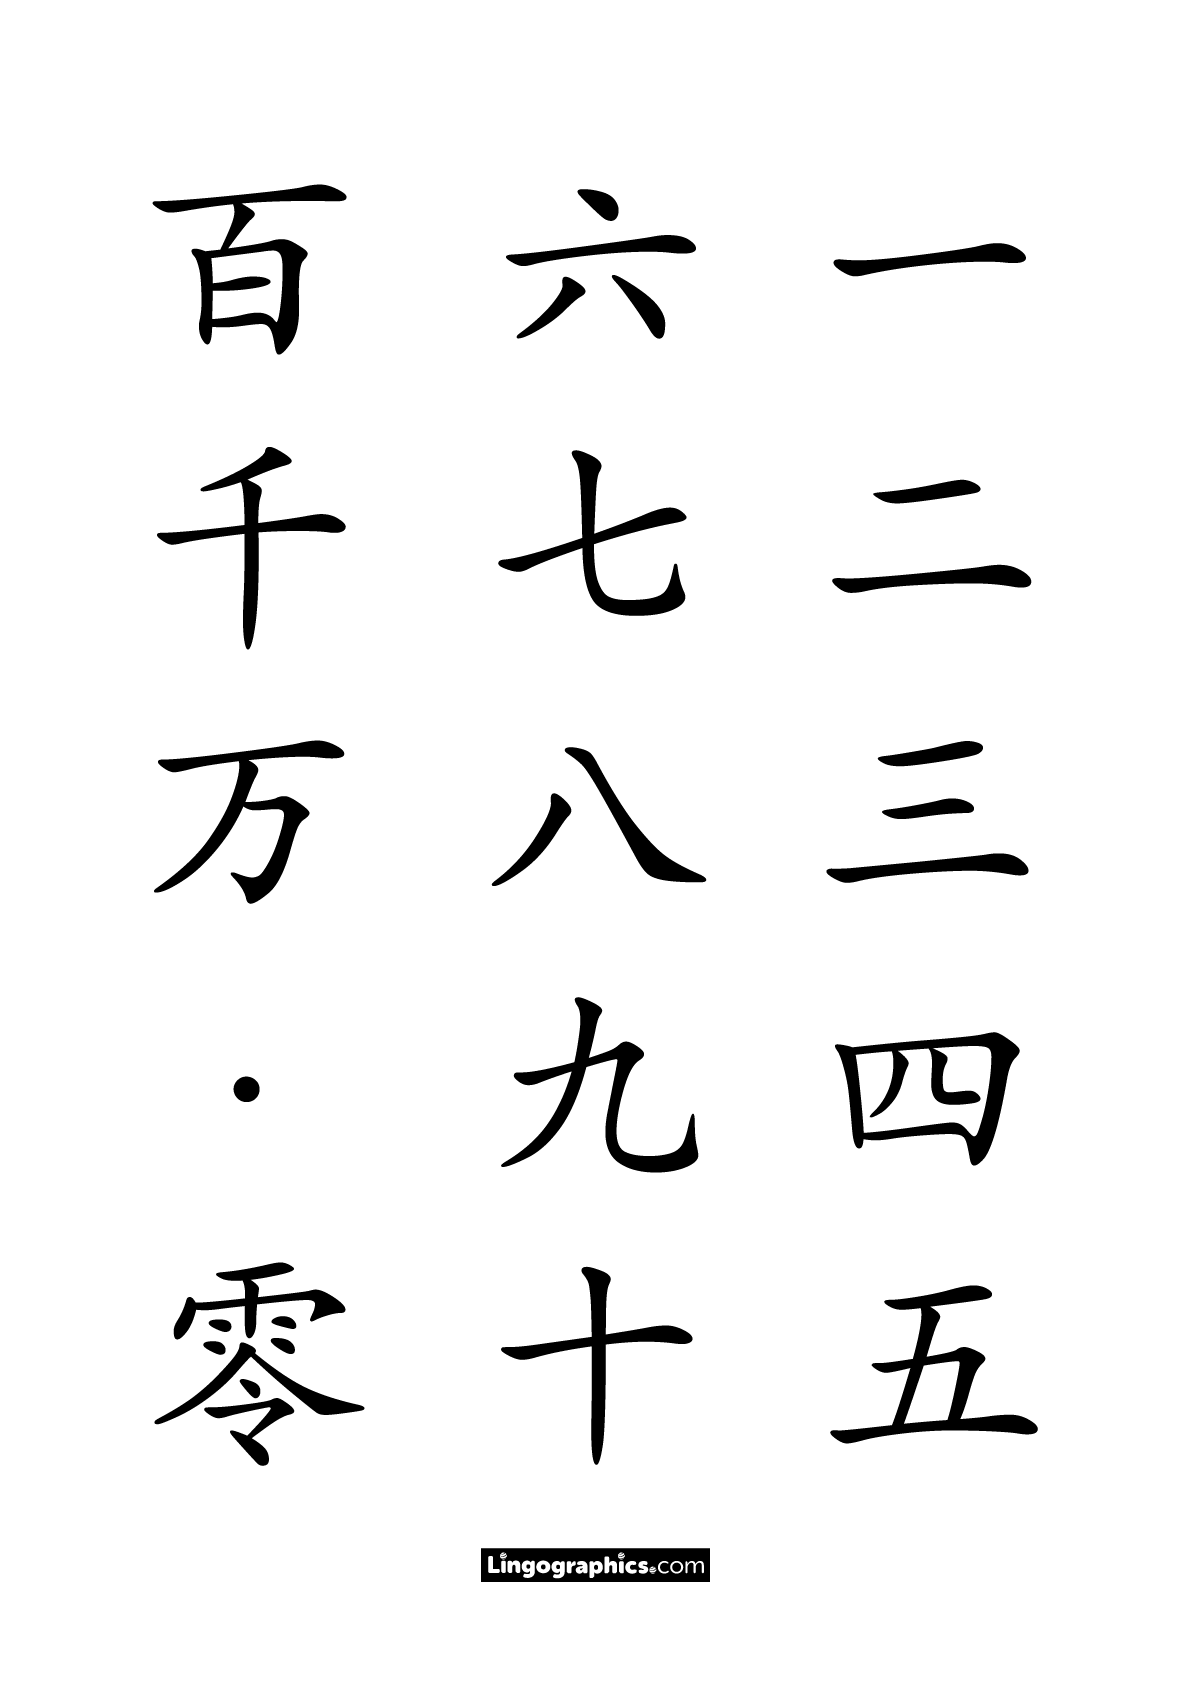 Japanese characters for numbers zero to ten thousand